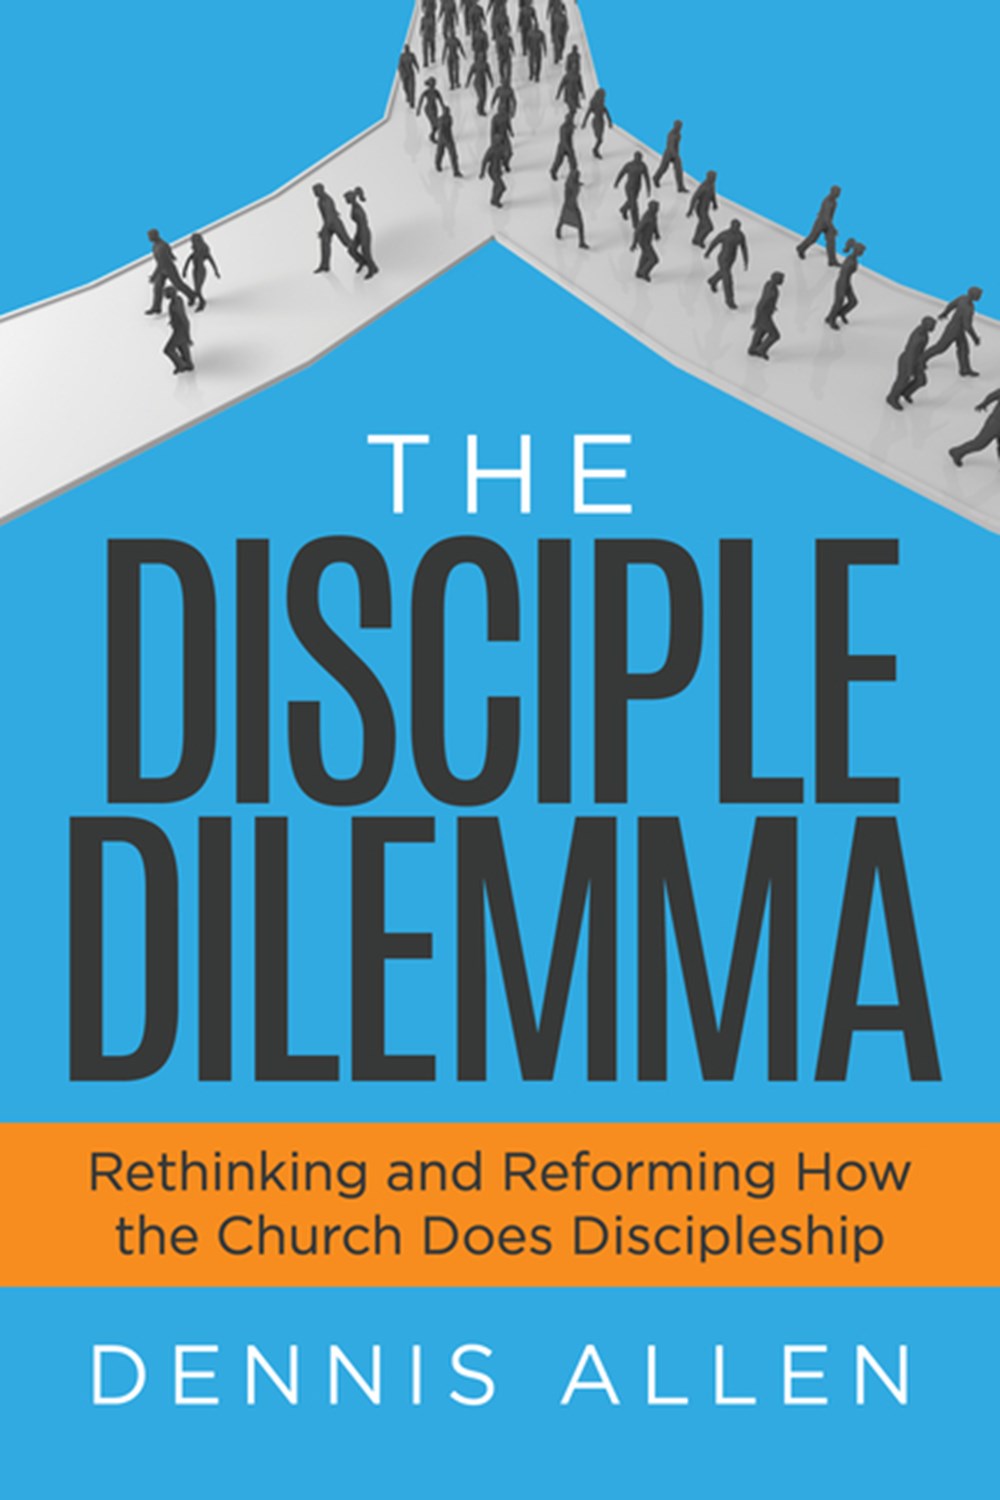 Disciple Dilemma: Rethinking and Reforming How the Church Does Discipleship